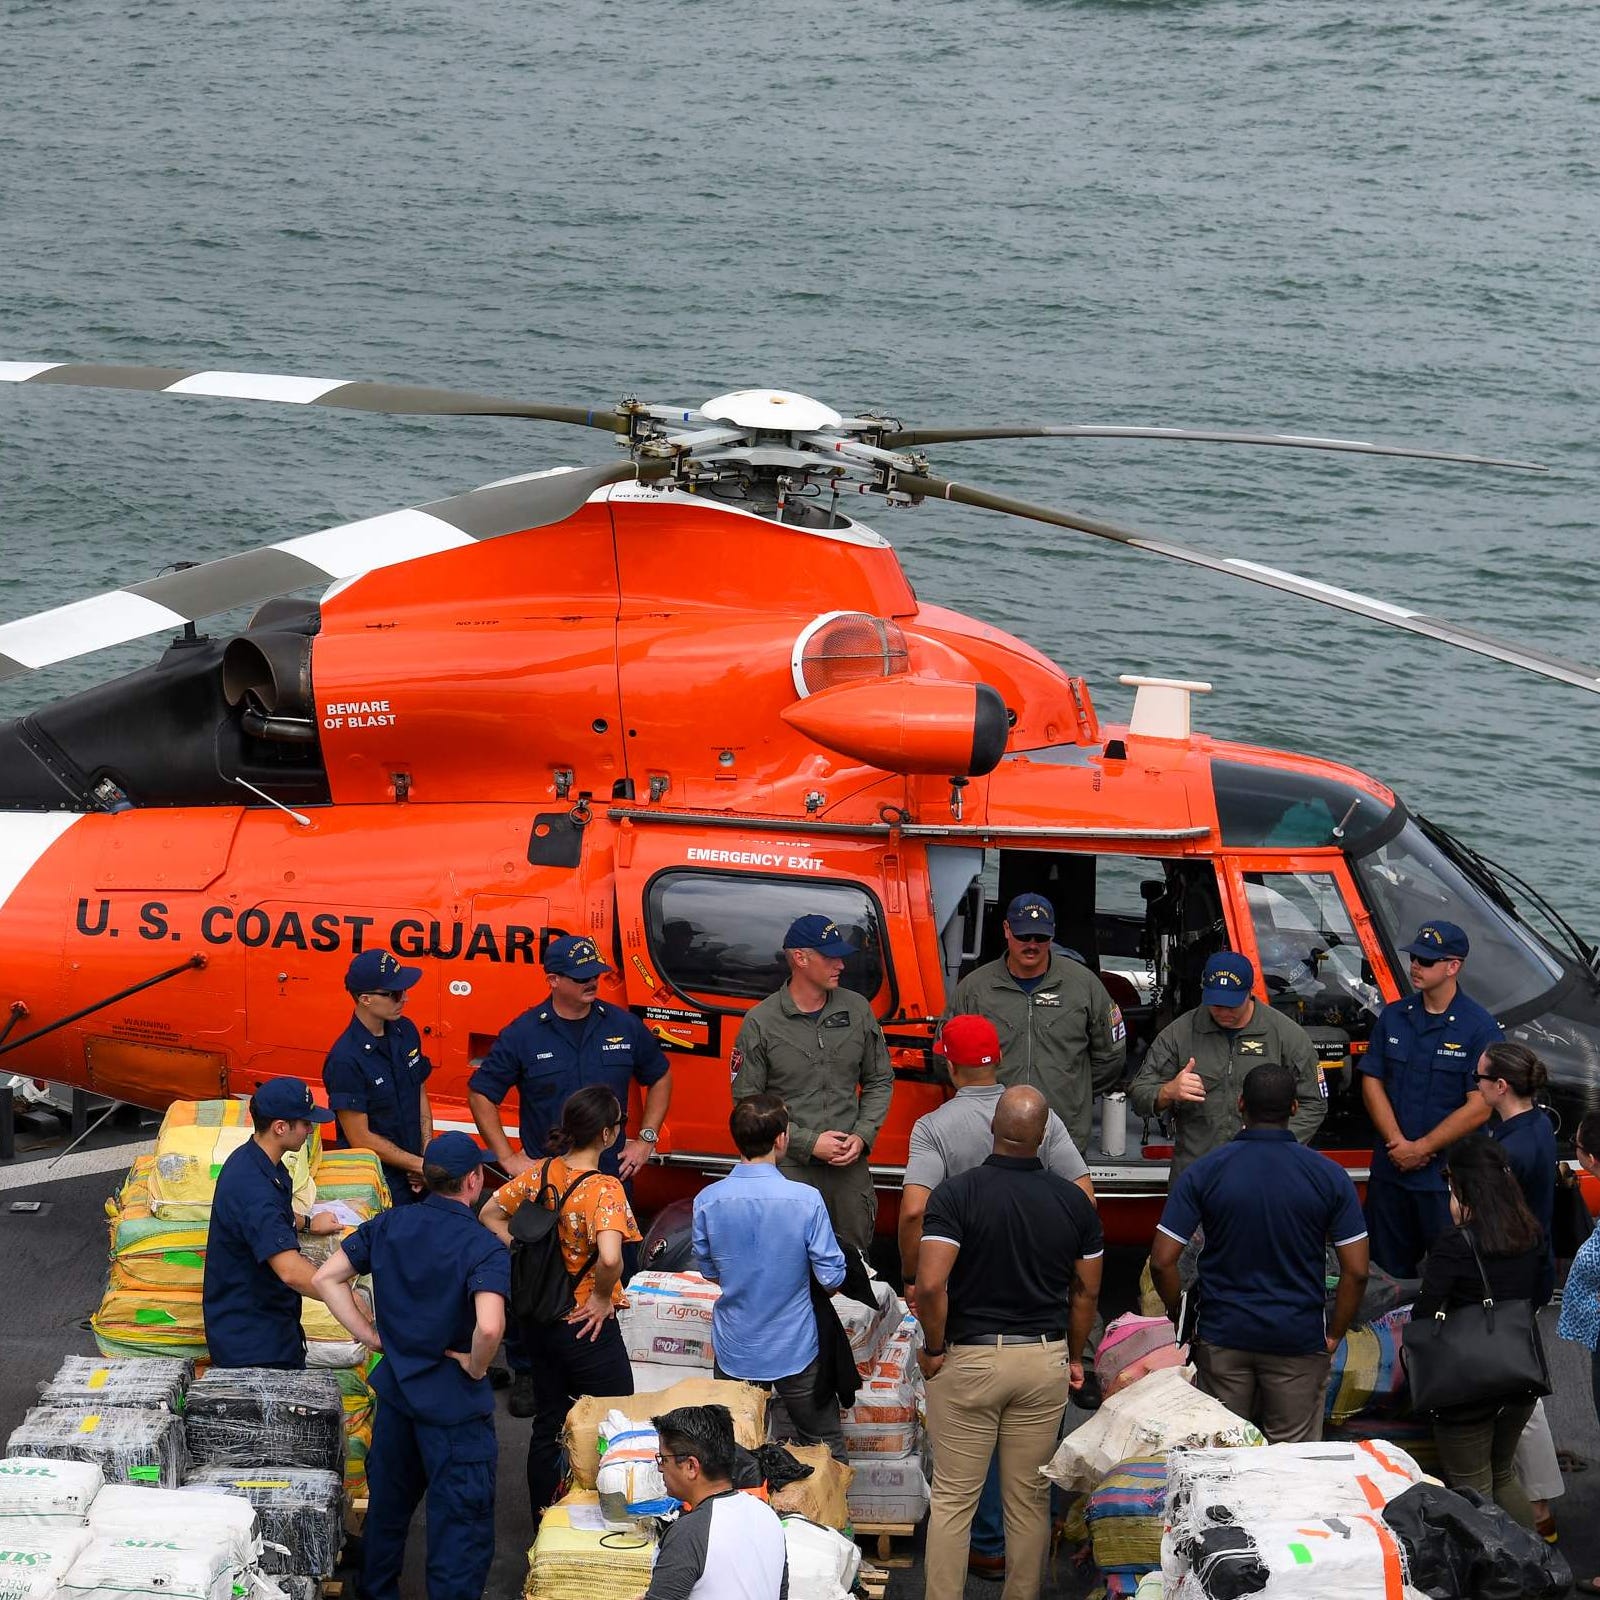 US Coast Guard personnel are pictured standing on the deck of Cutter James.